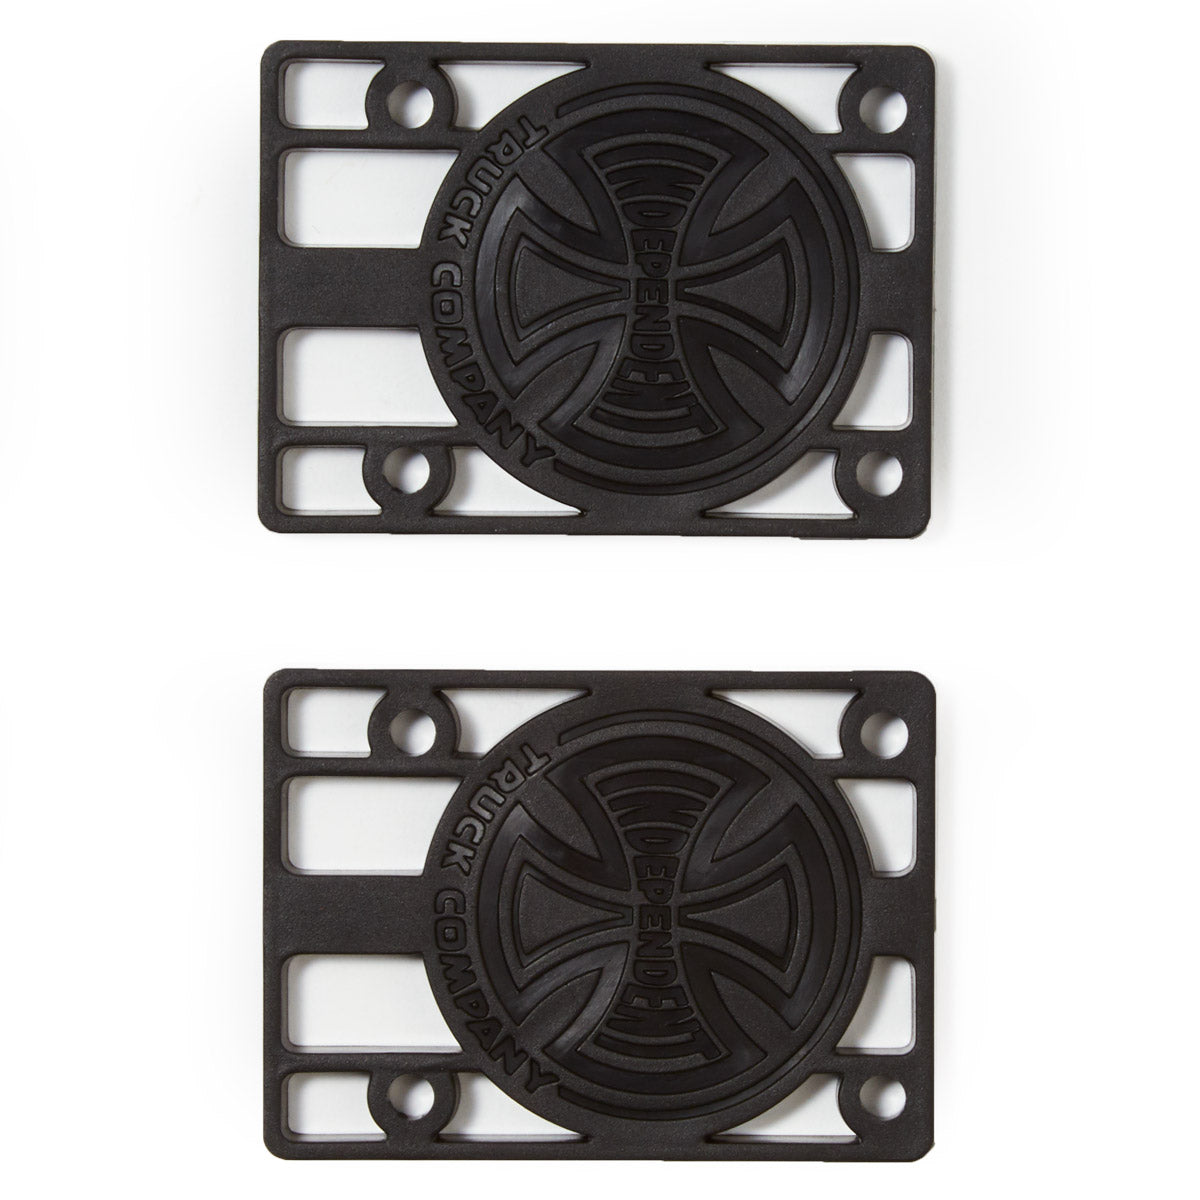 Independent Genuine Parts Risers - 1/4